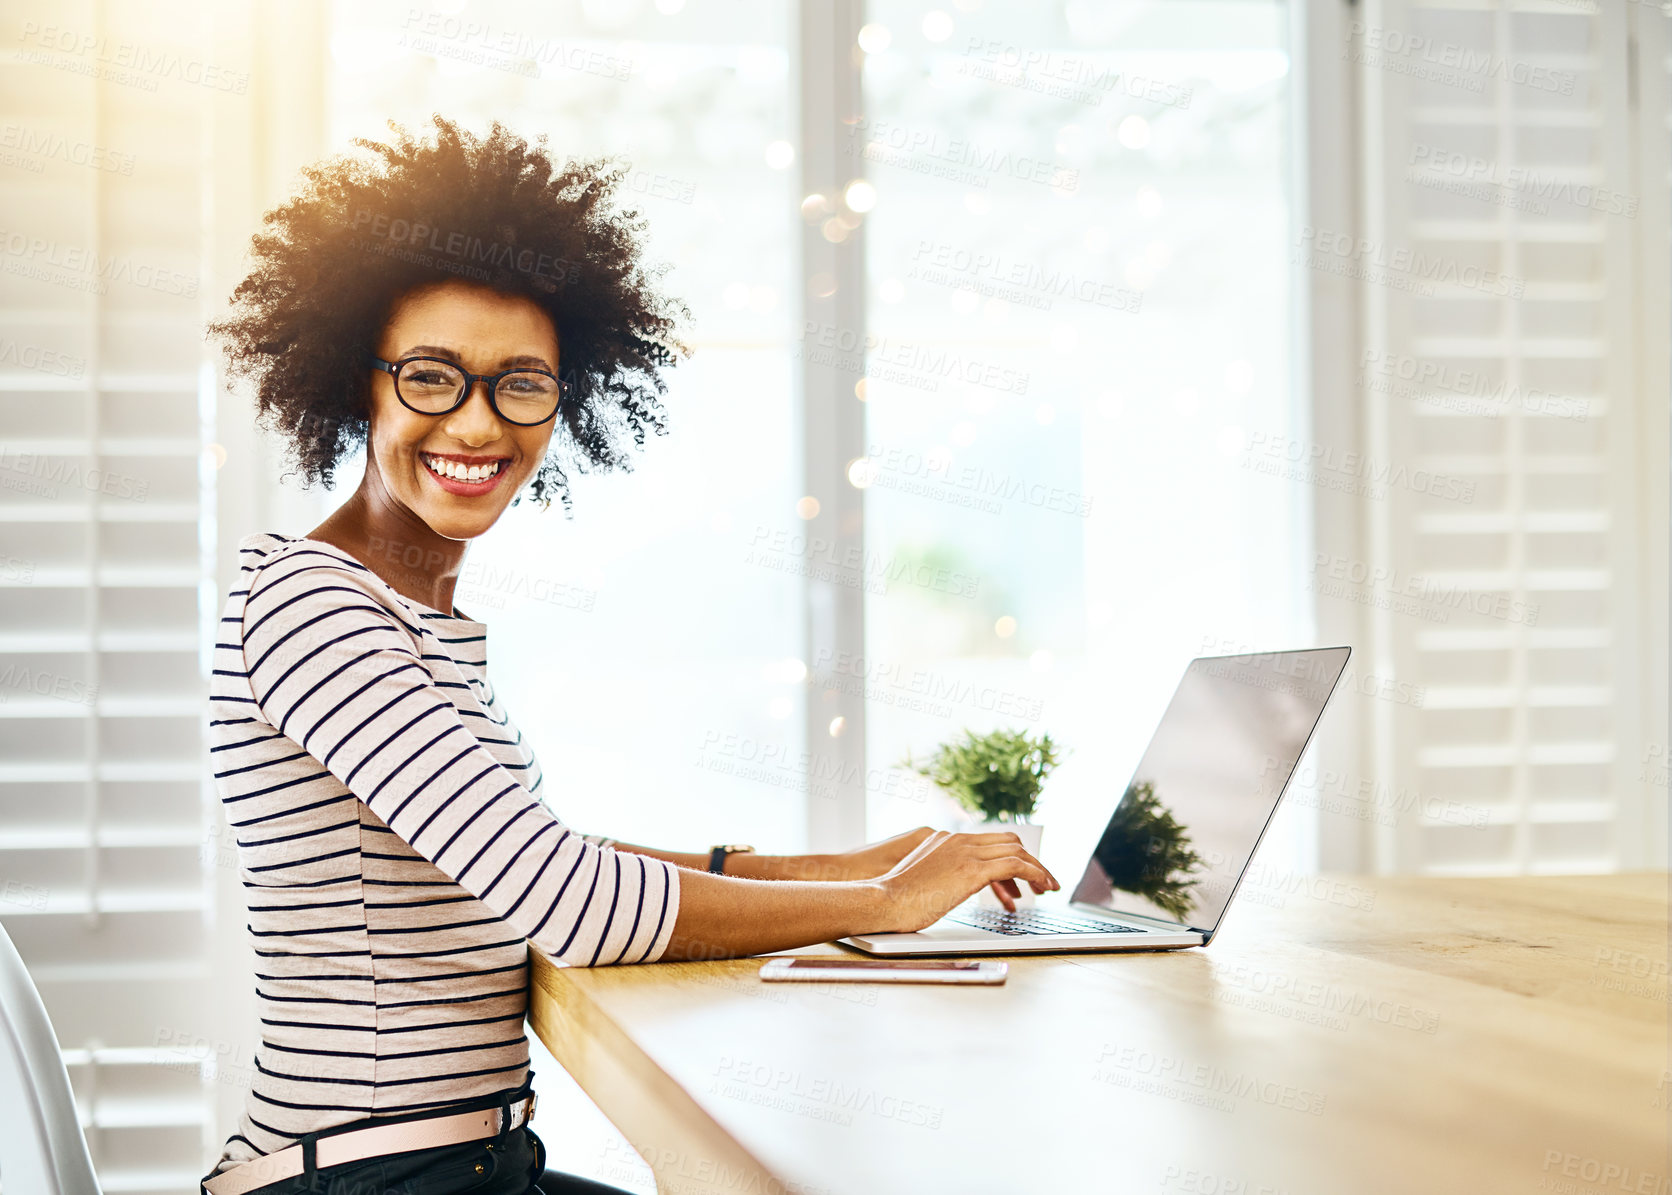 Buy stock photo Portrait of a cheerful young woman working on her laptop while looking at the camera